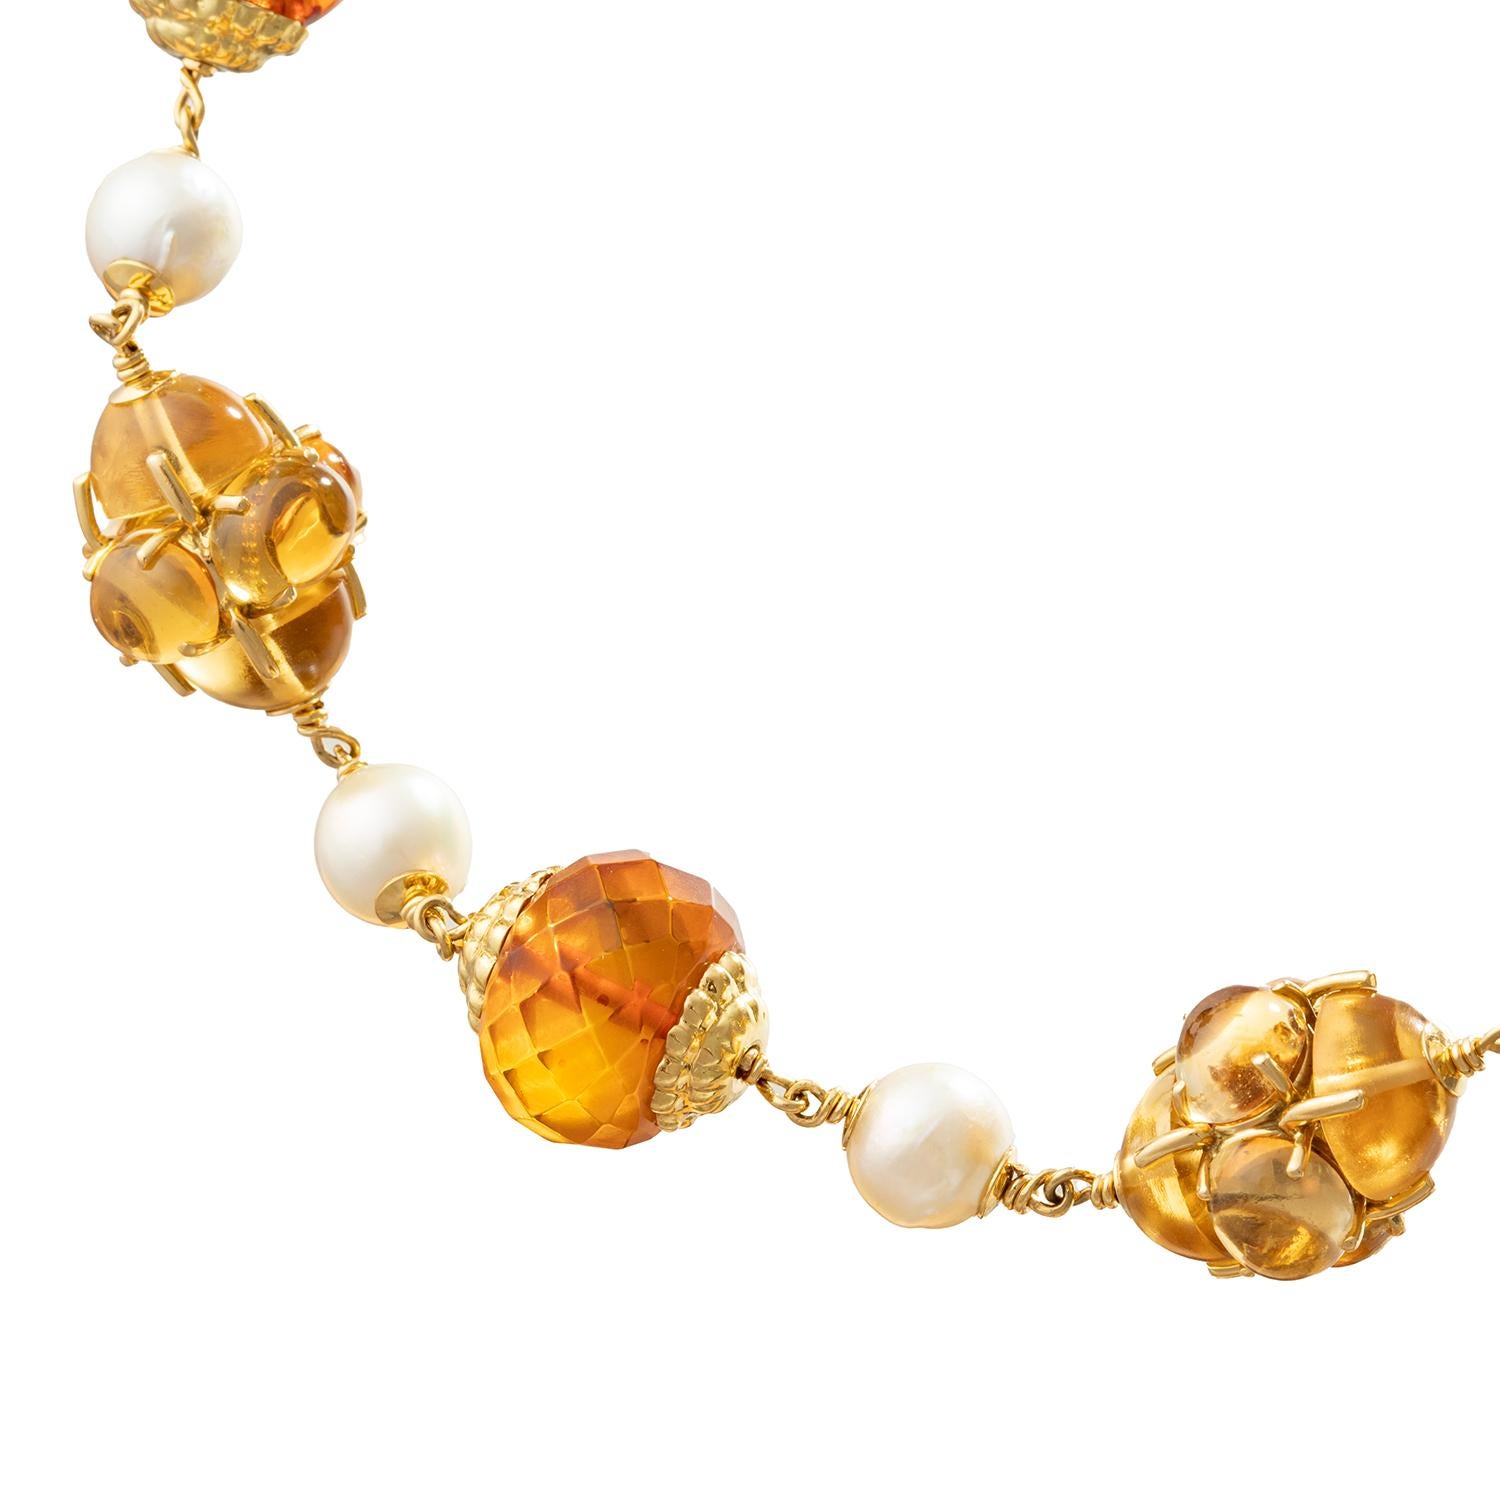 Bead Seaman Schepps 18k Gold Pearl Citrine Amber Baroque Necklace For Sale